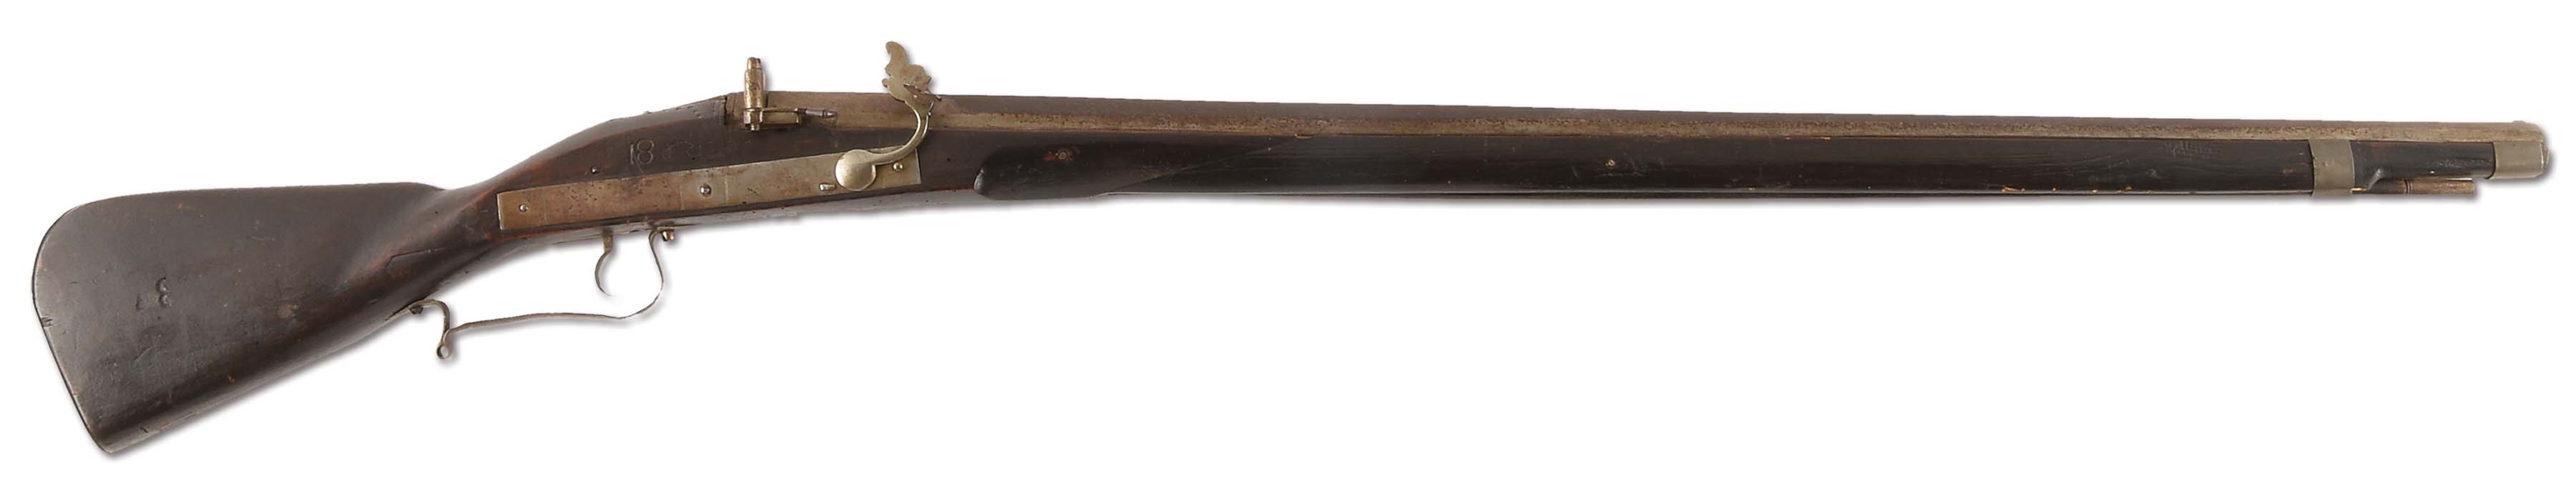 (A) RARE AND DESIRABLE MID-17TH CENTURY GERMANIC MATCHLOCK MUSKET OF THE TYPE USED IN COLONIAL AMERICA AS WELL AS MANY COUNTRIES IN EUROPE.